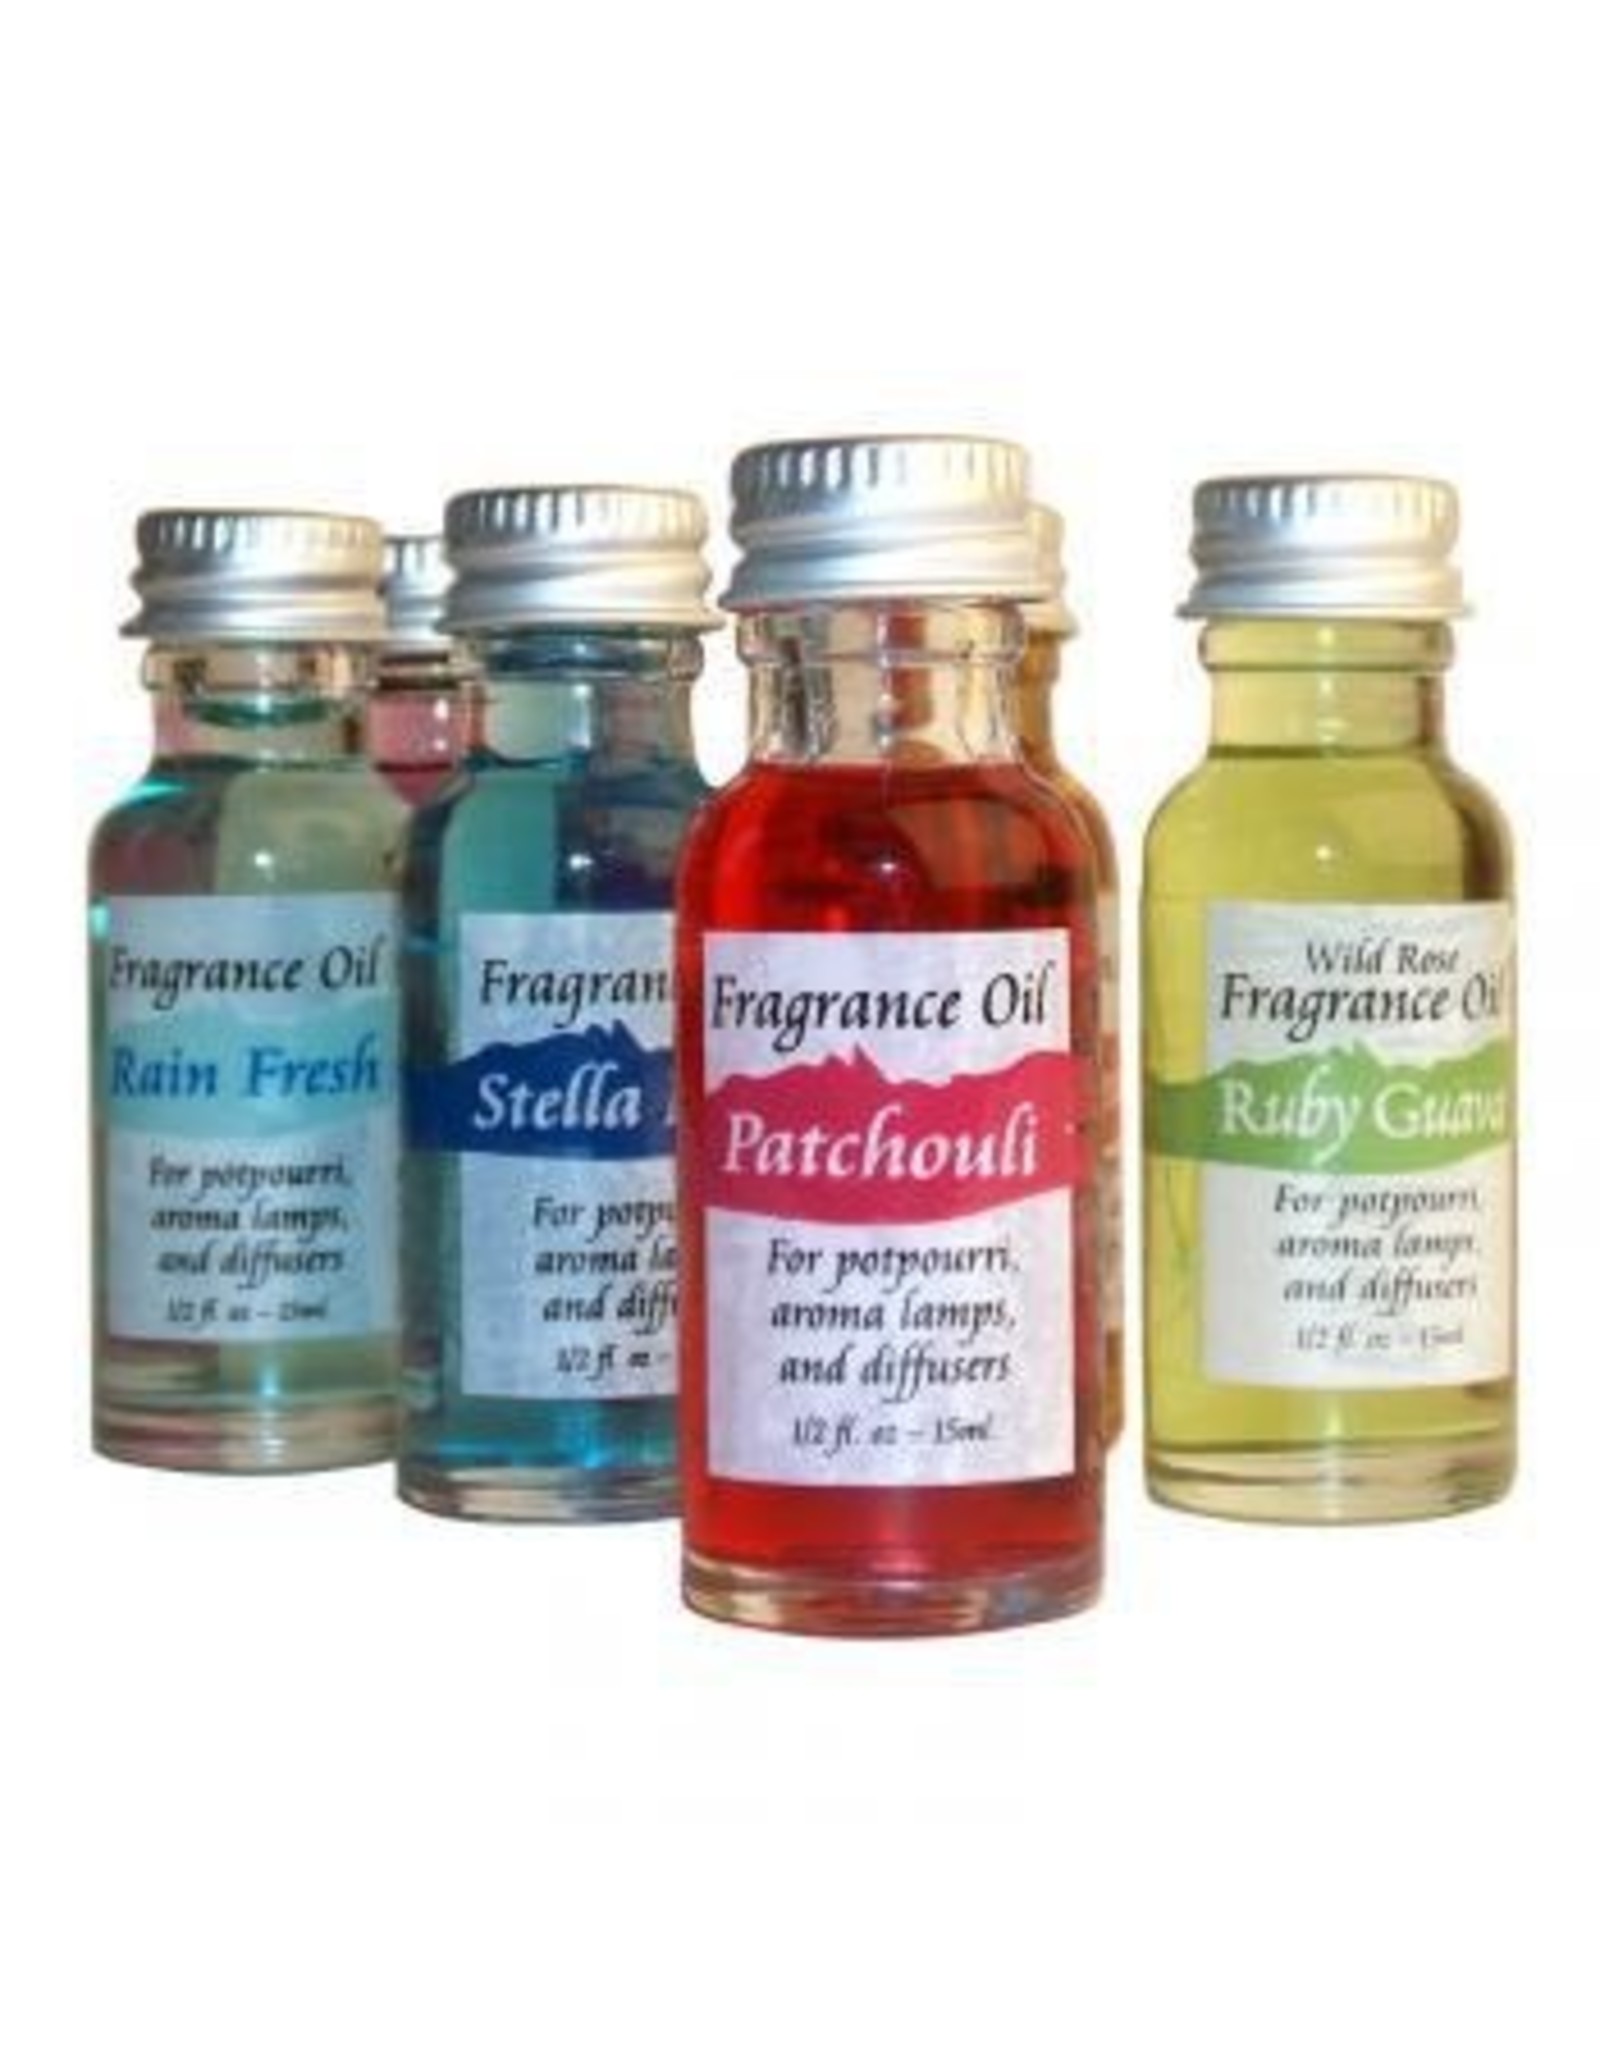 Bayberry Fragrance Oil